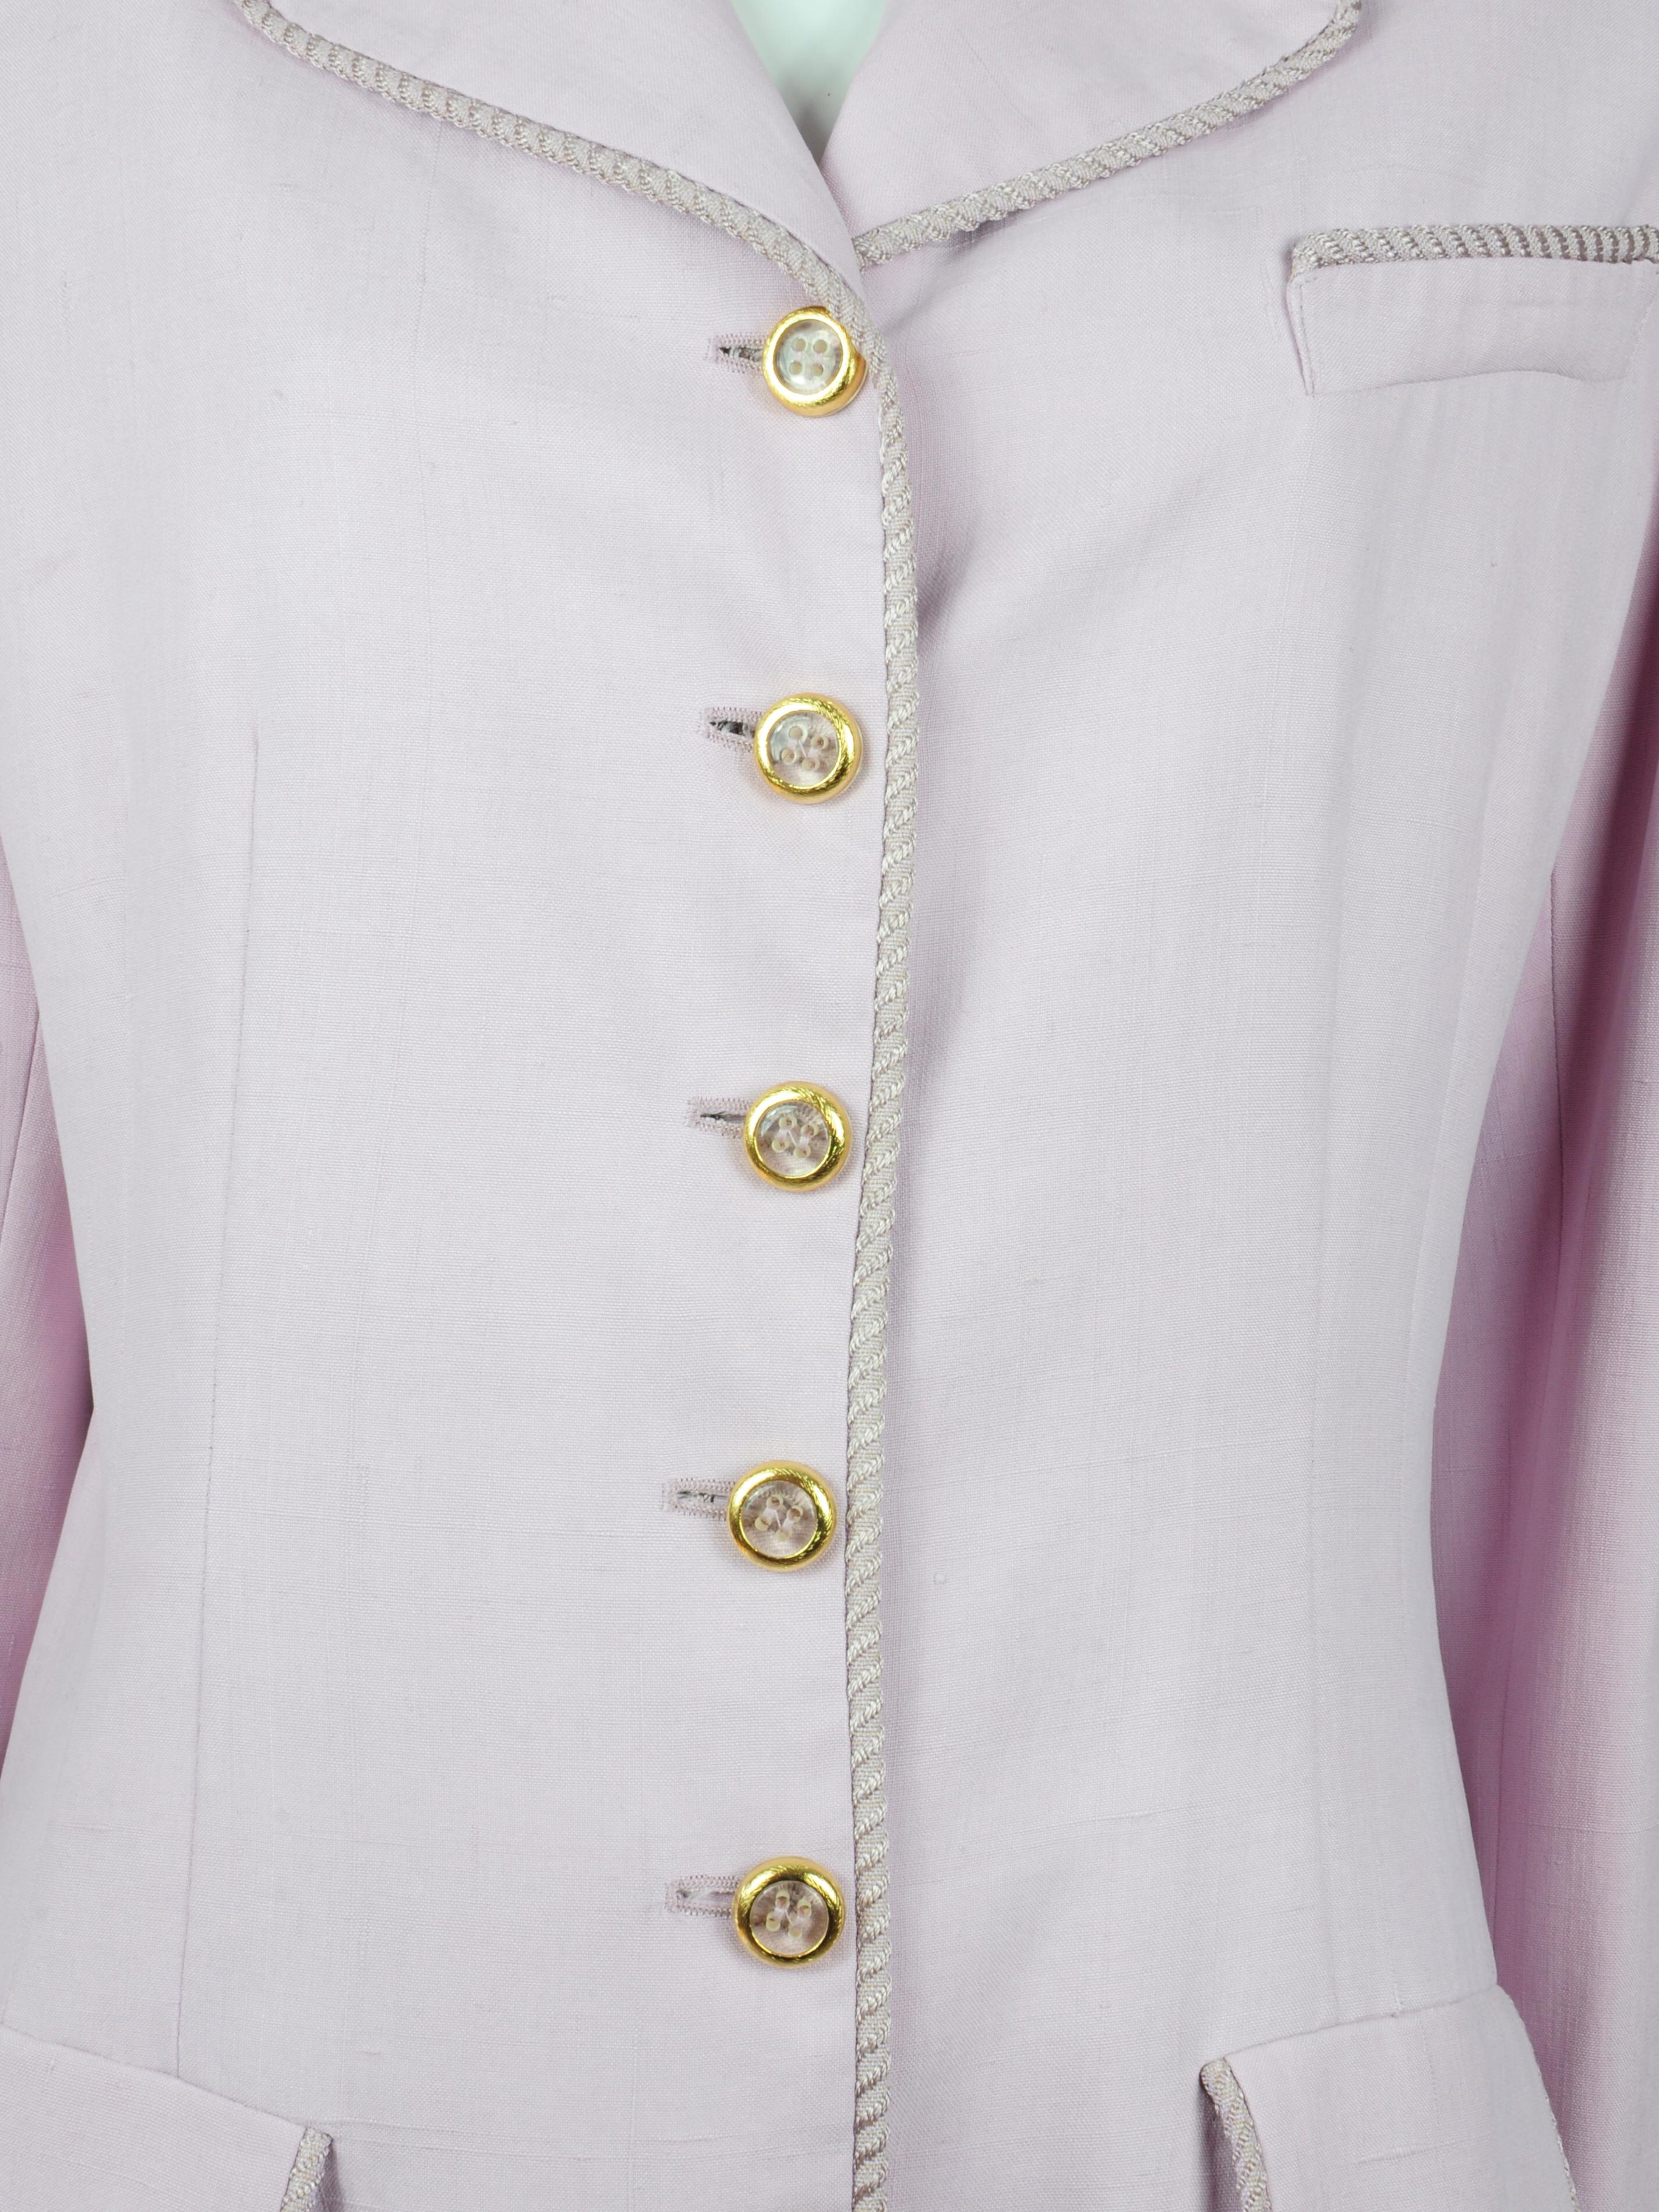 A silk vintage Valentino blazer jacket - the epitome of chic – with gorgeous golden buttons and piping details on the collar, sleeves and pockets. The tailoring is exquisite (as Valentino suiting most often is) and will hug a curvy shape whilst